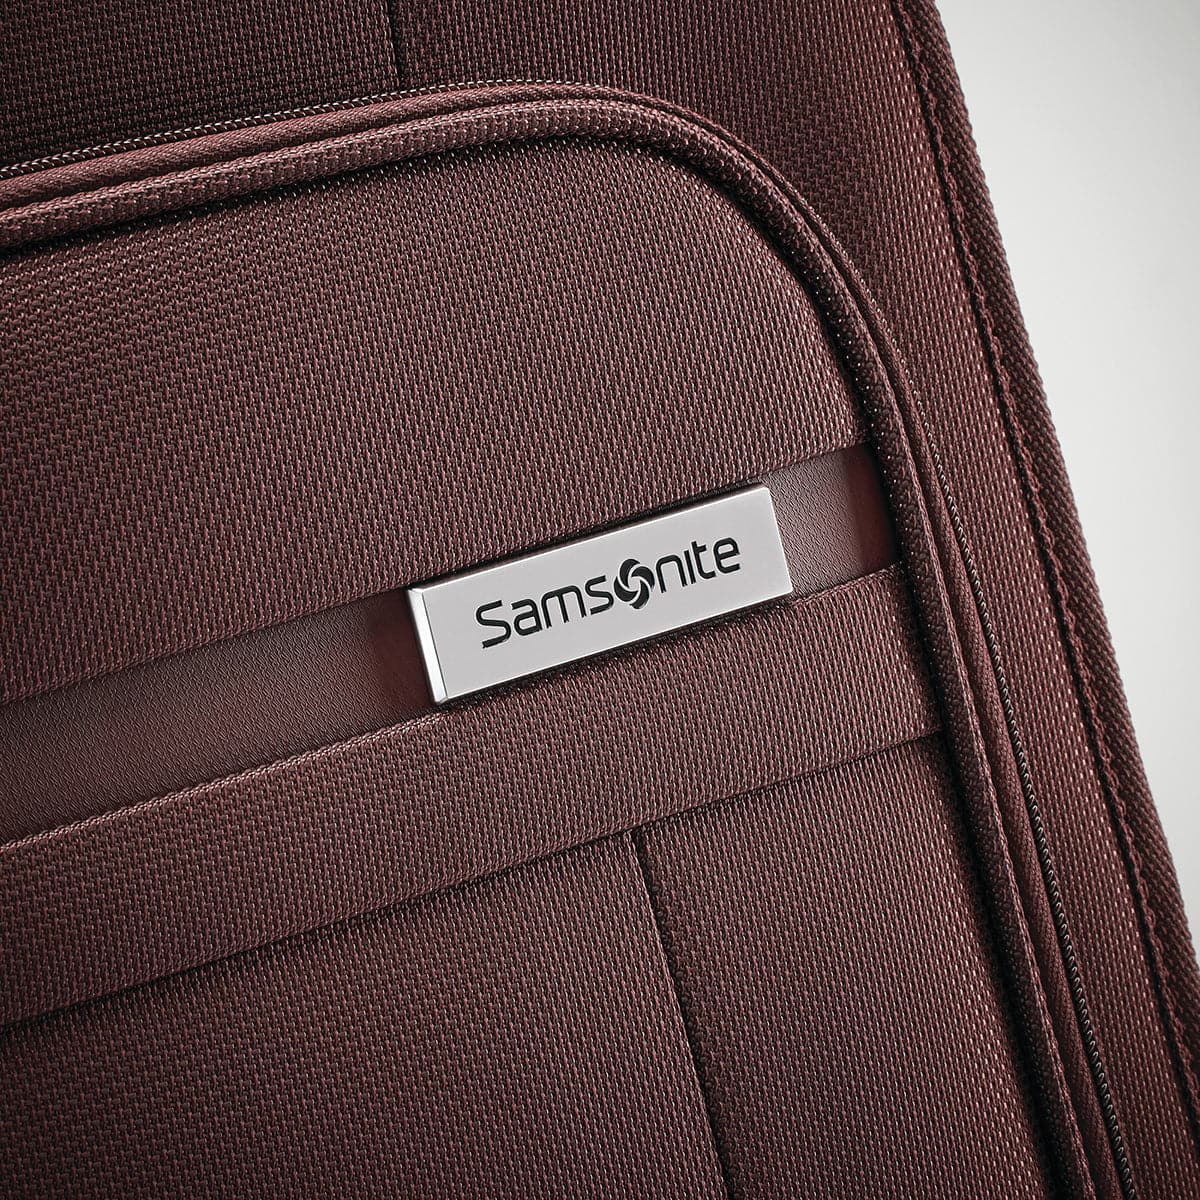 Samsonite Insignis Underseater Wheeled Carry On Luggage